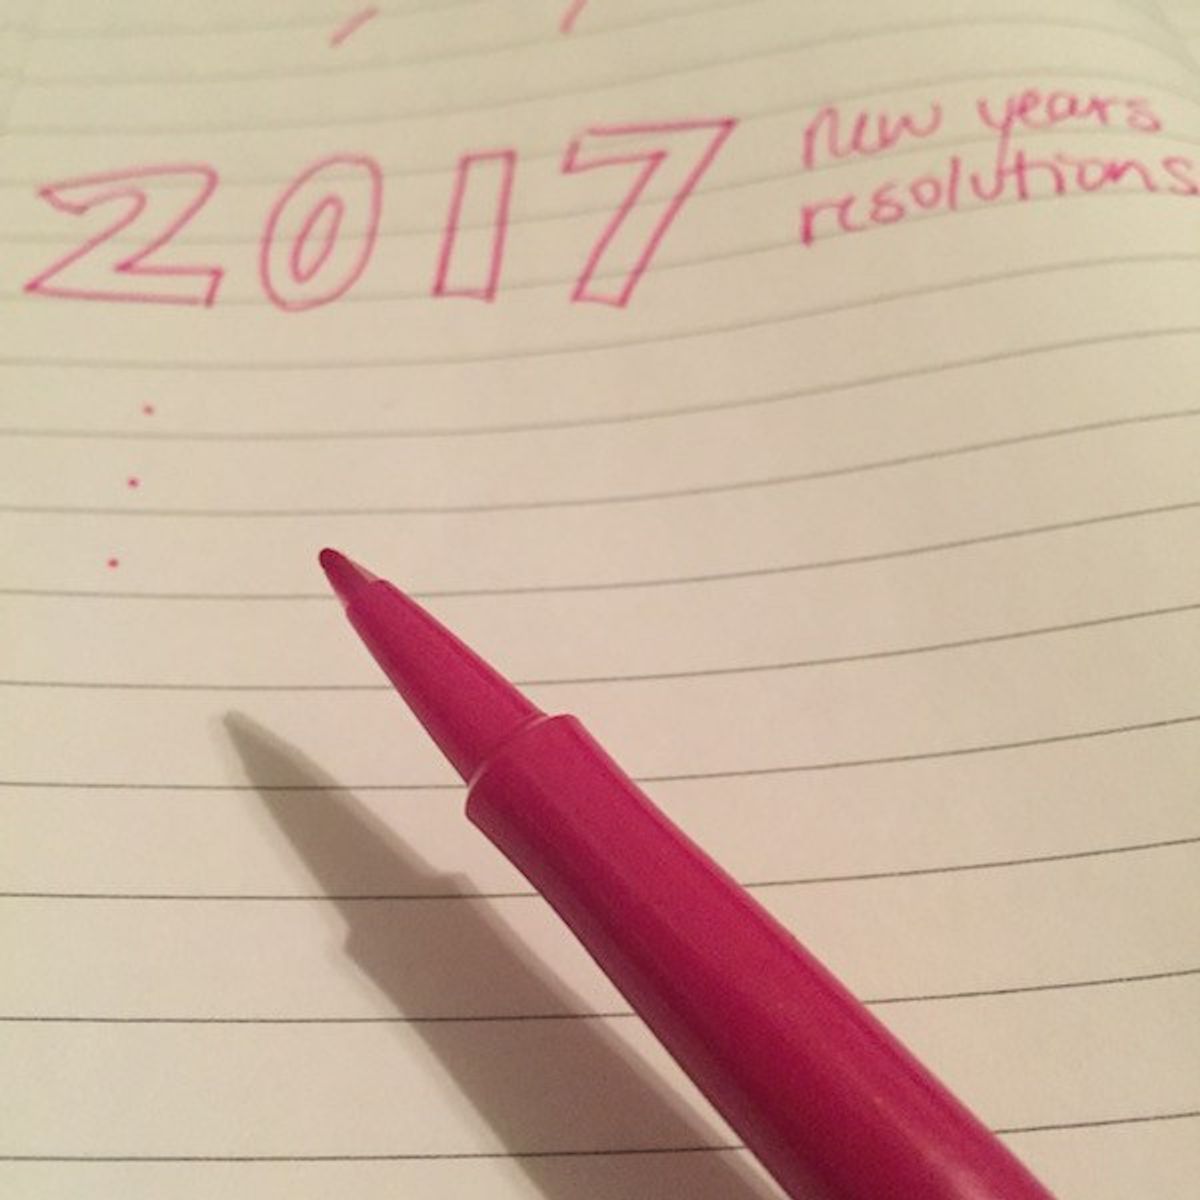 Realistic New Year's Resolutions